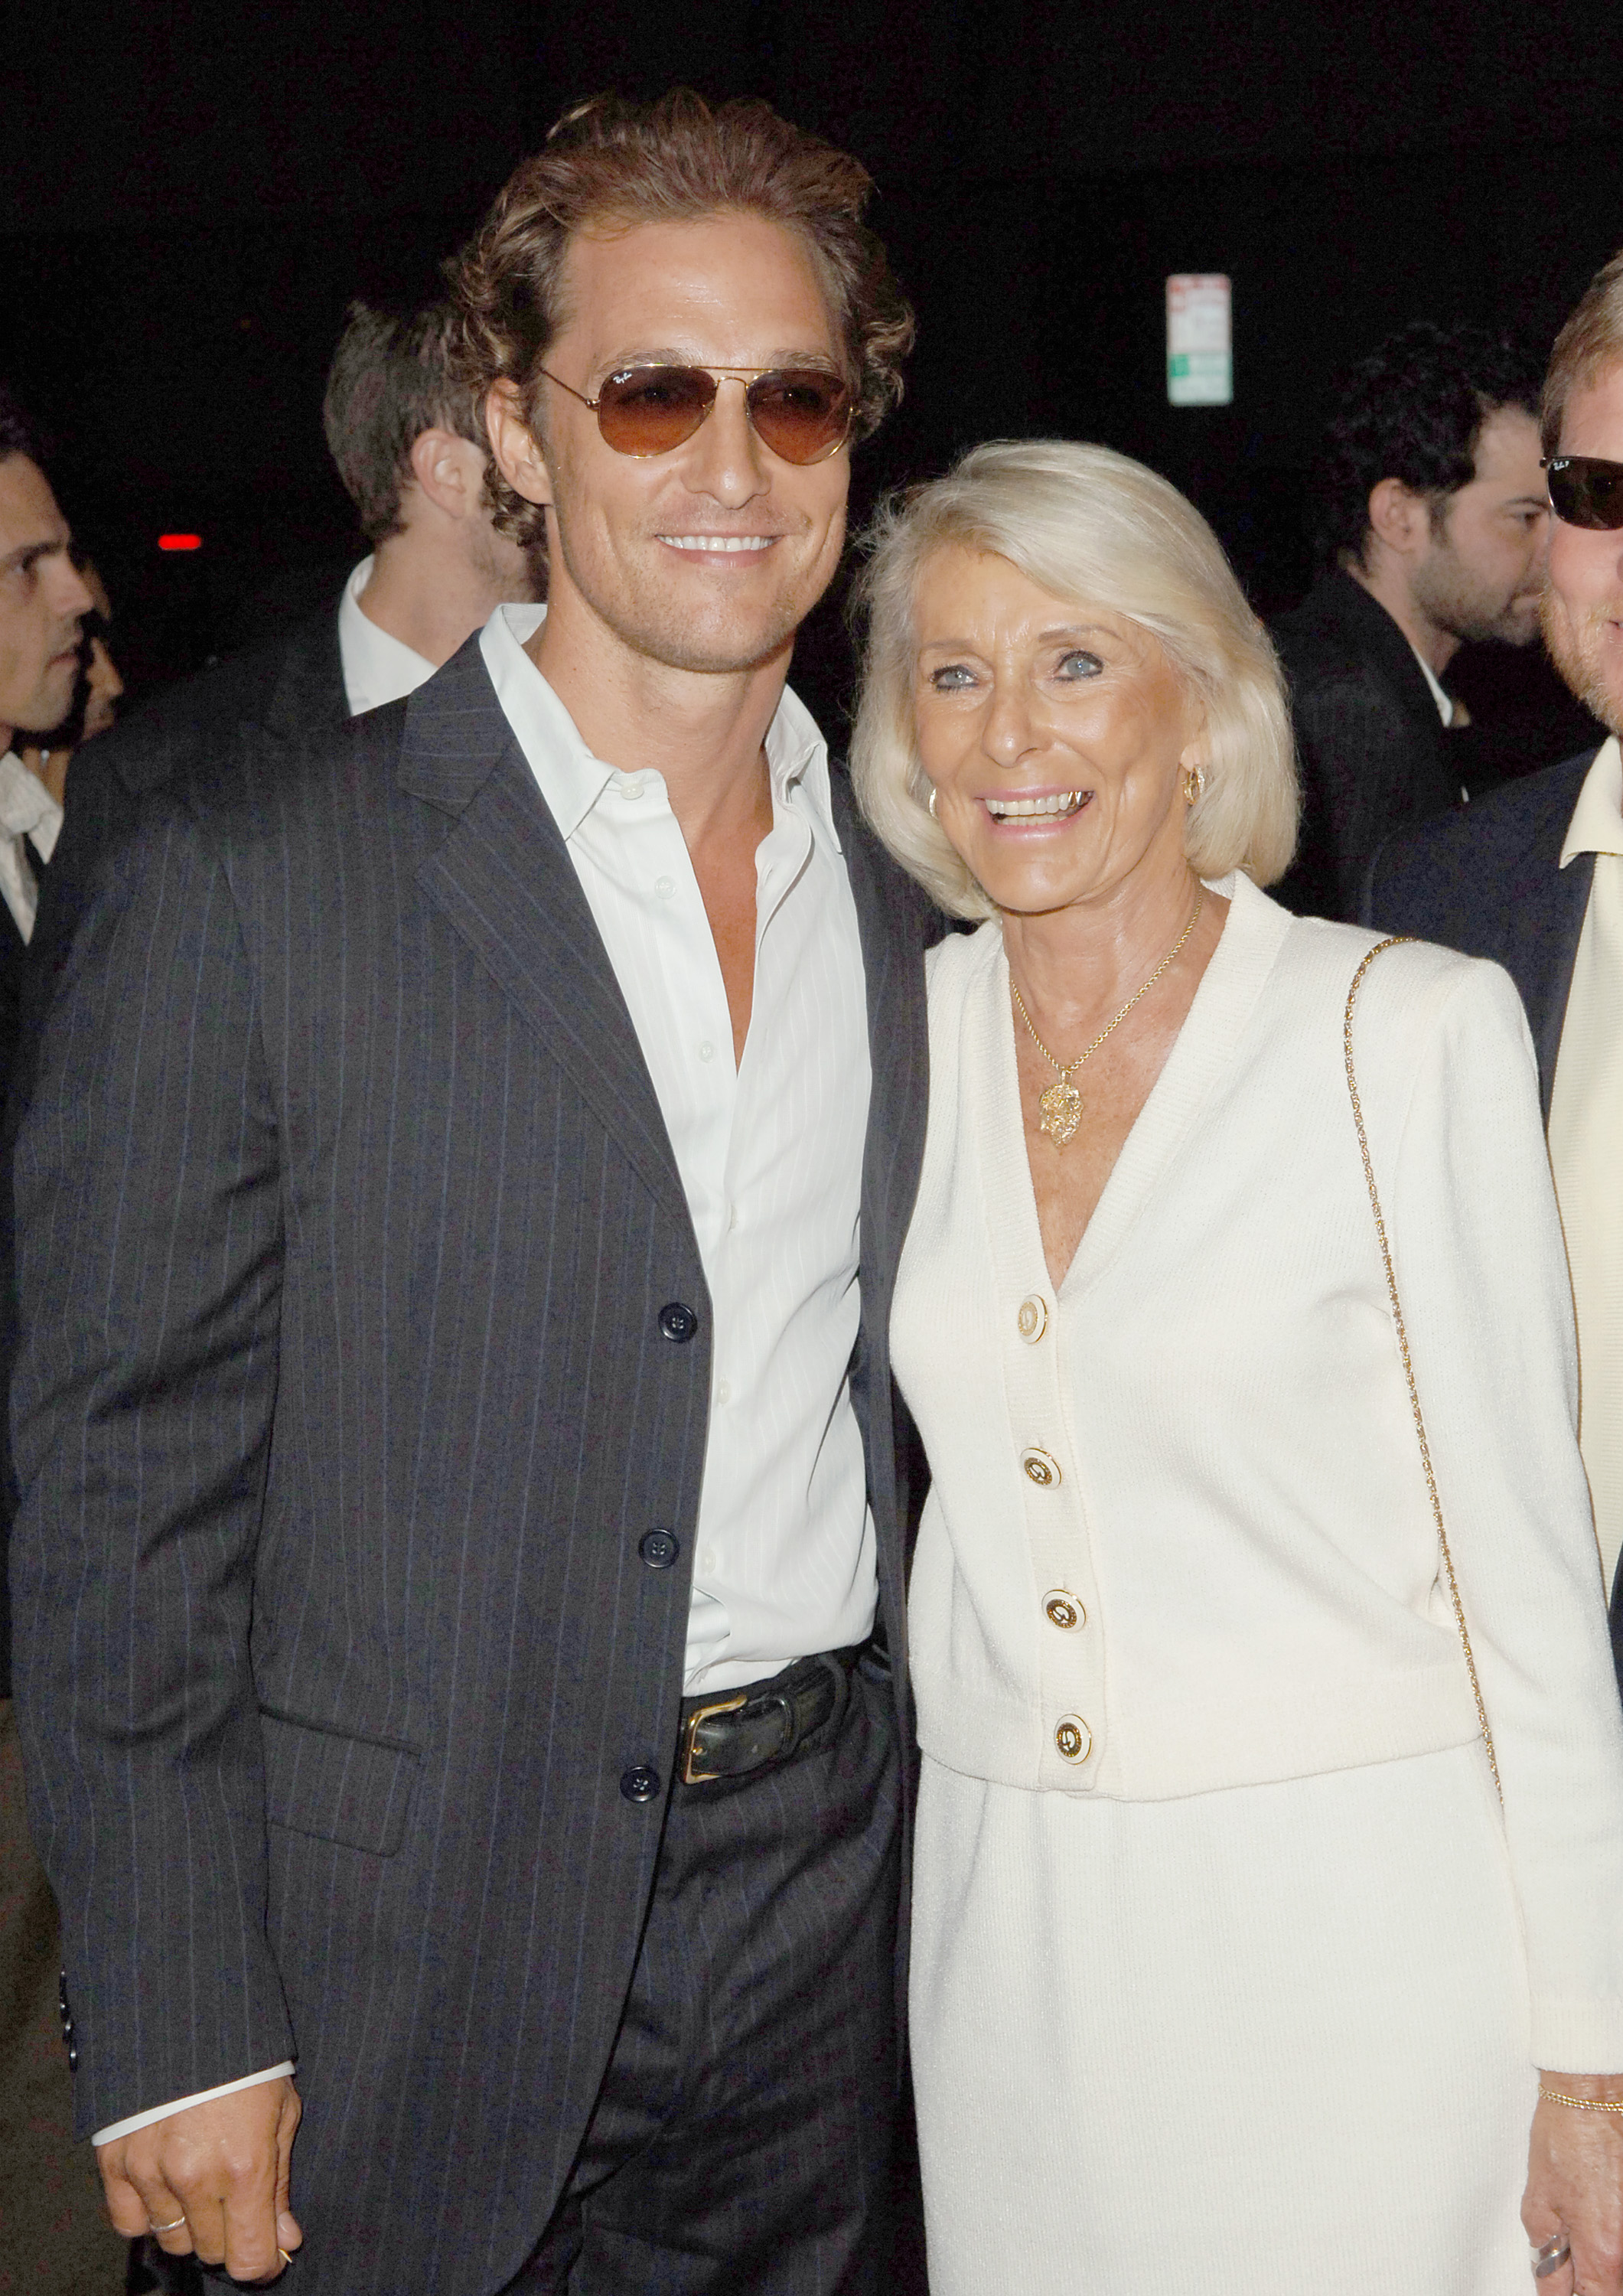 Matthew and Kay McConaughey at the premiere of "Two for the Money" in Los Angeles, California on September 26, 2005 | Source: Getty Images